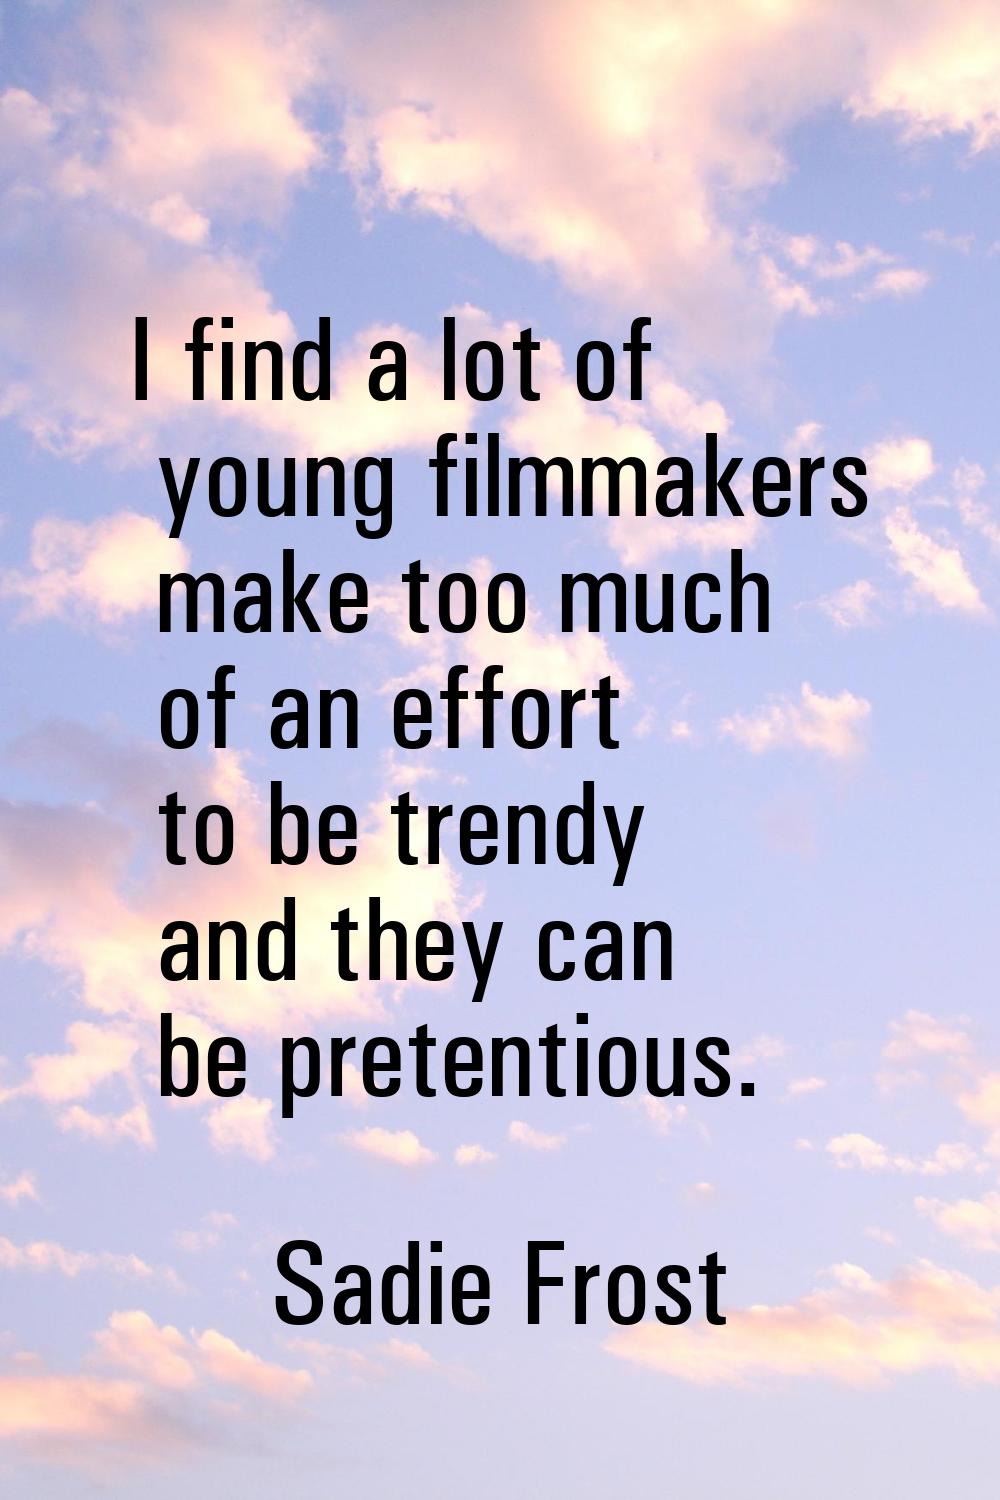 I find a lot of young filmmakers make too much of an effort to be trendy and they can be pretentiou